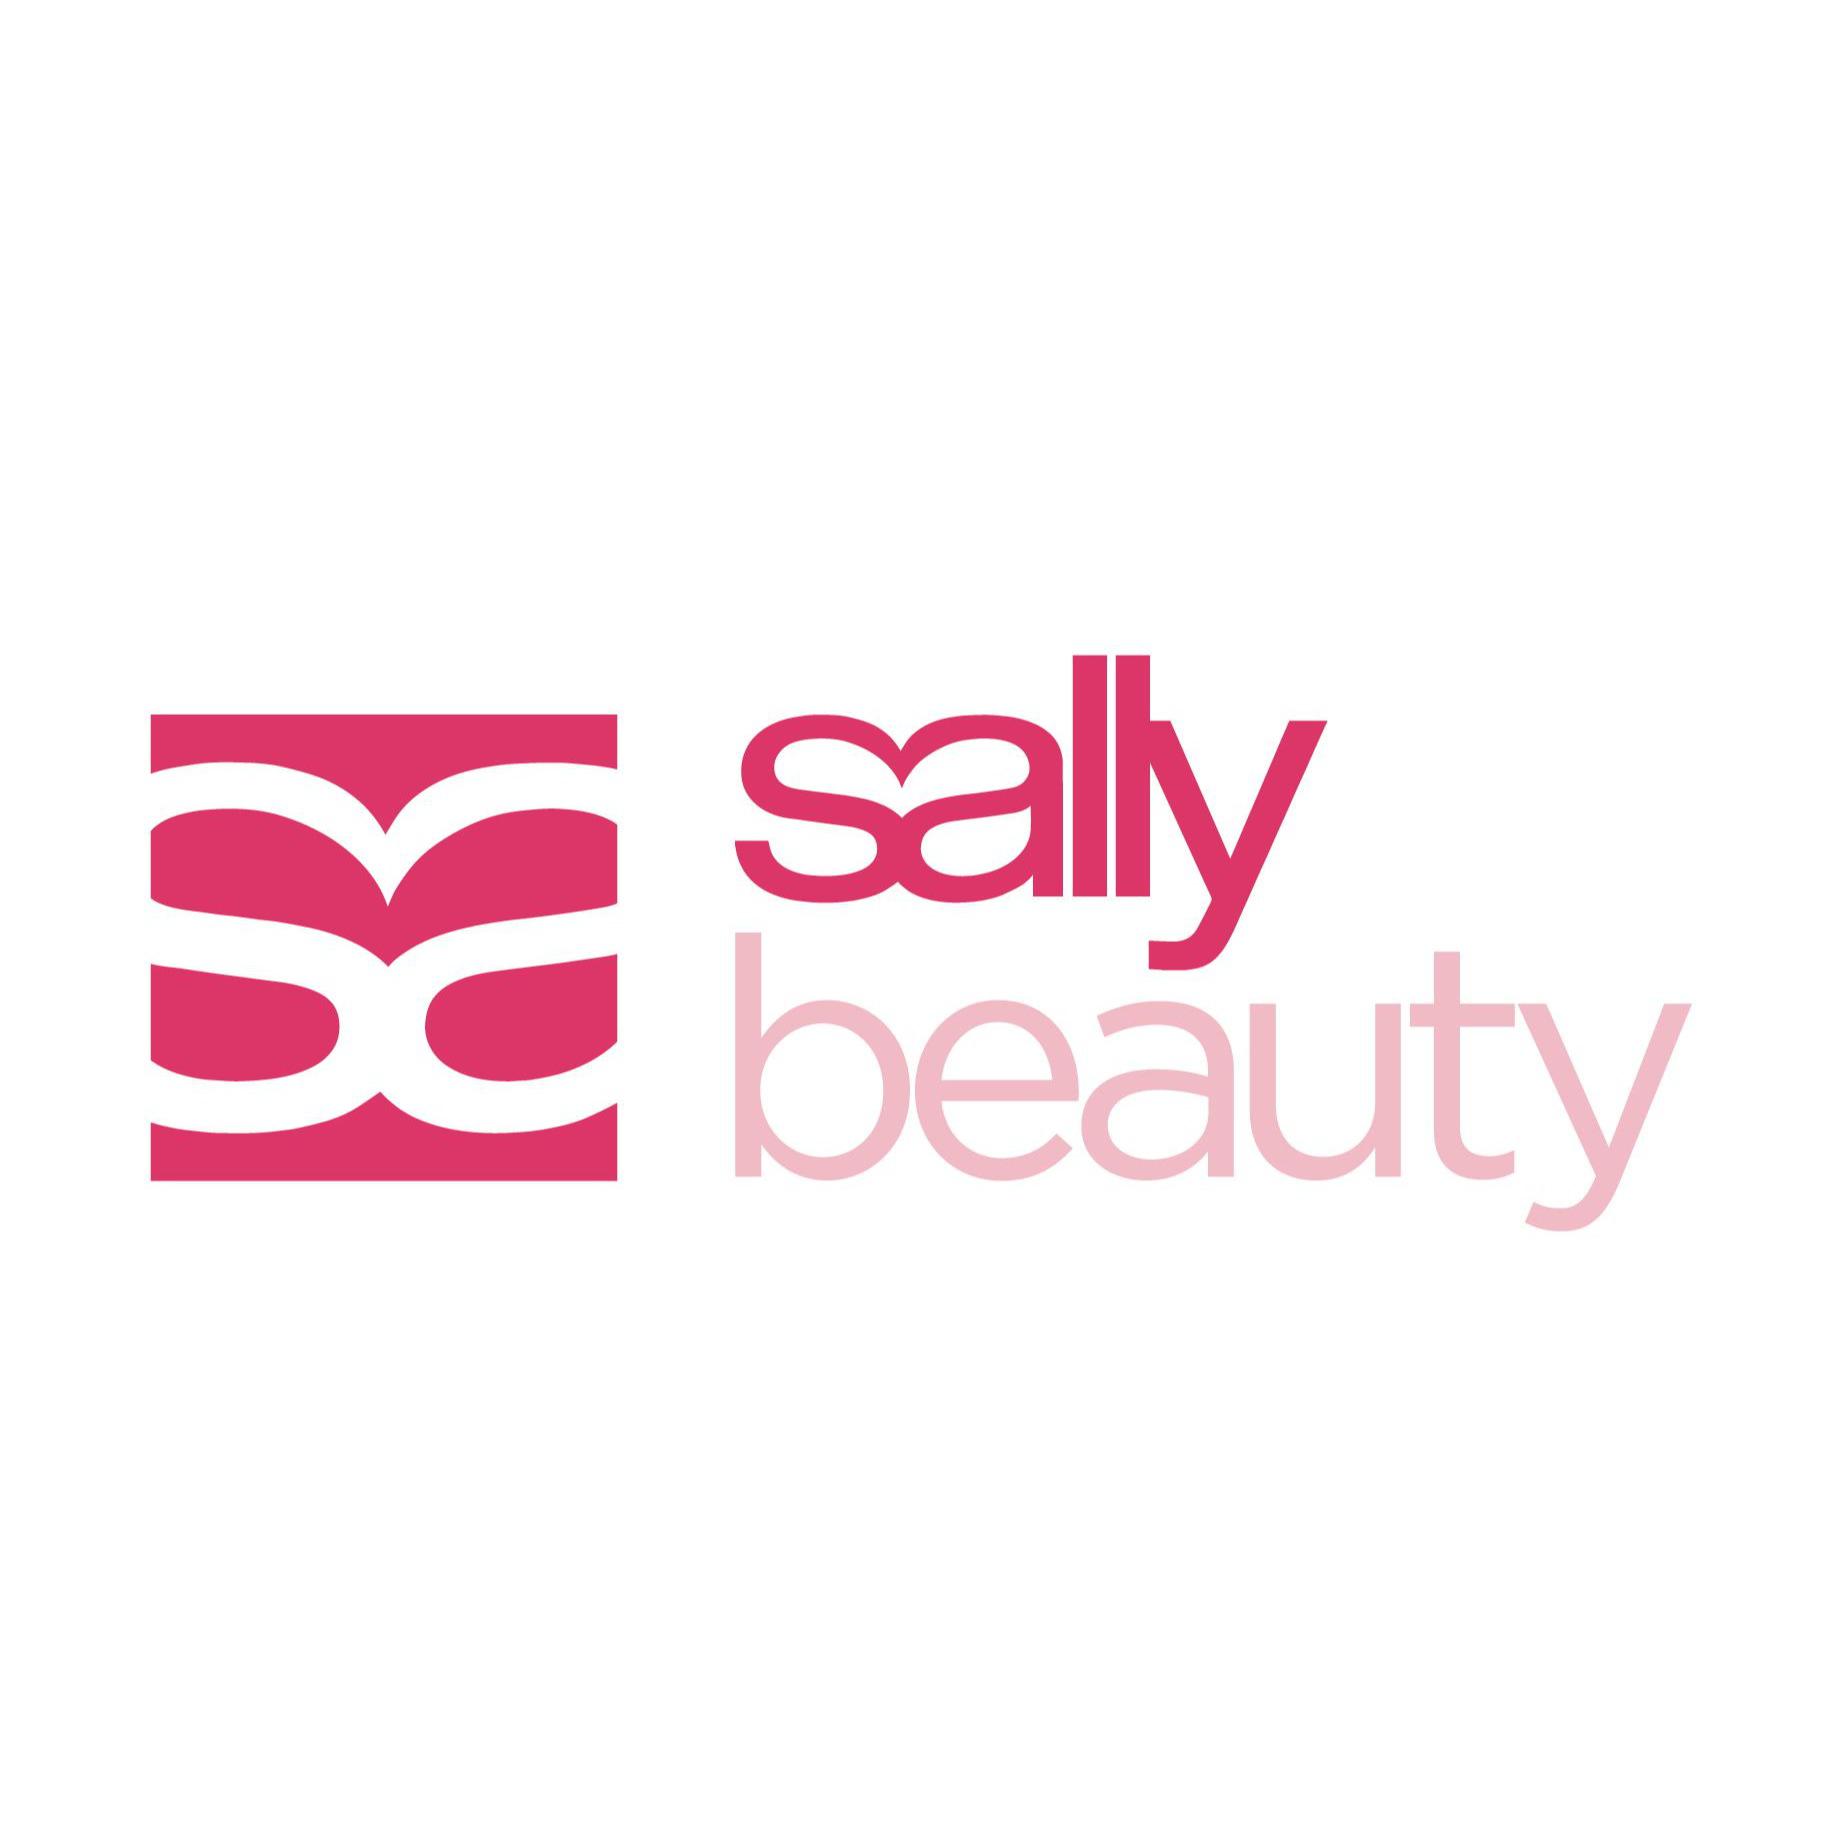 Sally Beauty Sutton Coldfld 01213 132352